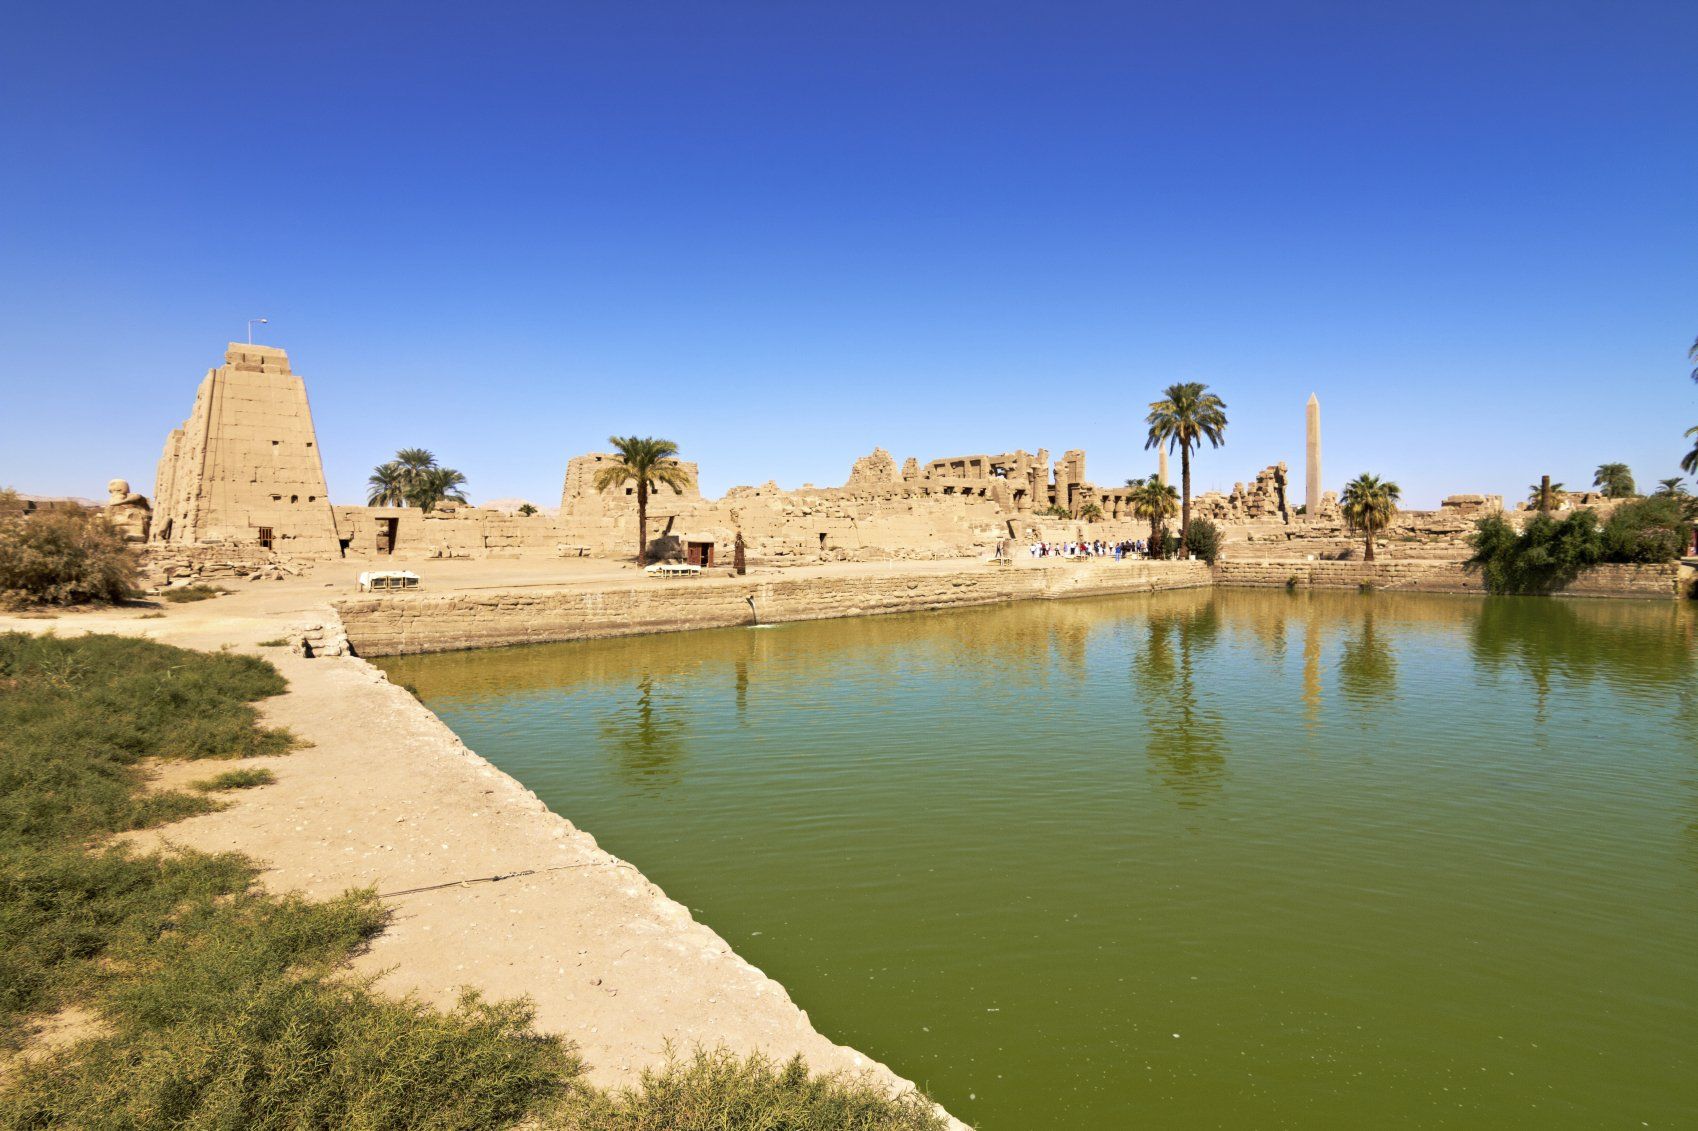 On the banks of the river Nile in Egypt.